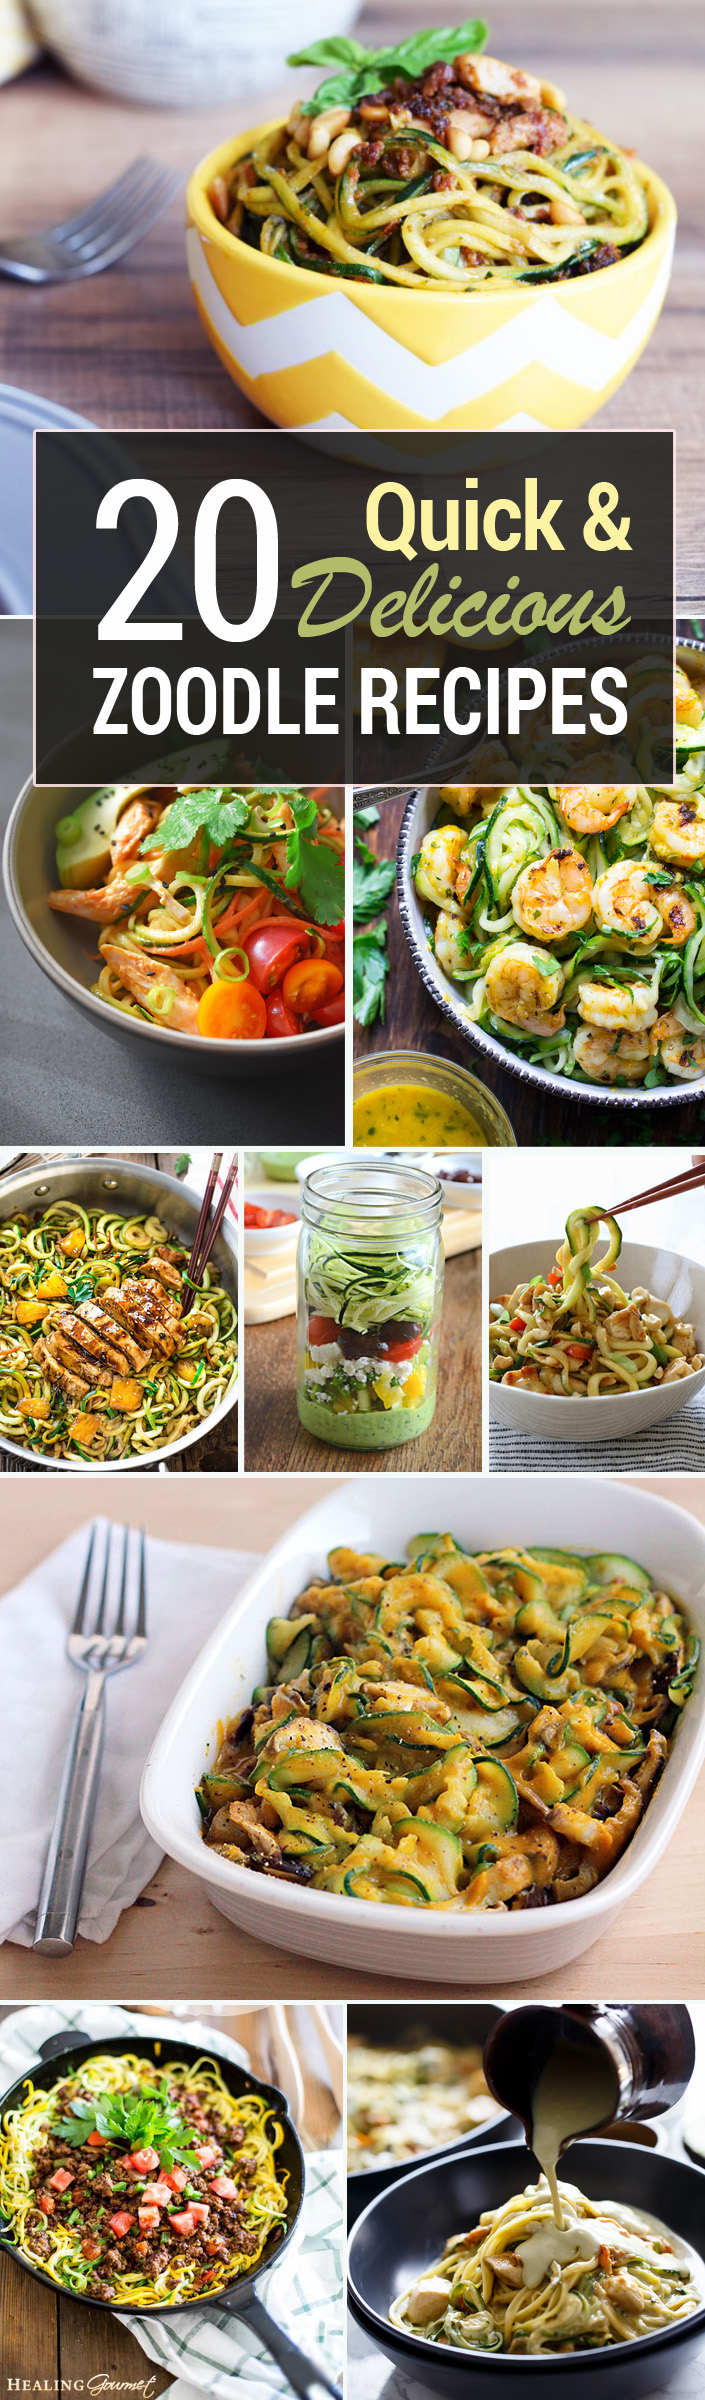 Healing Gourmet - Meal plans, diet plans and recipes for healthy eating ...